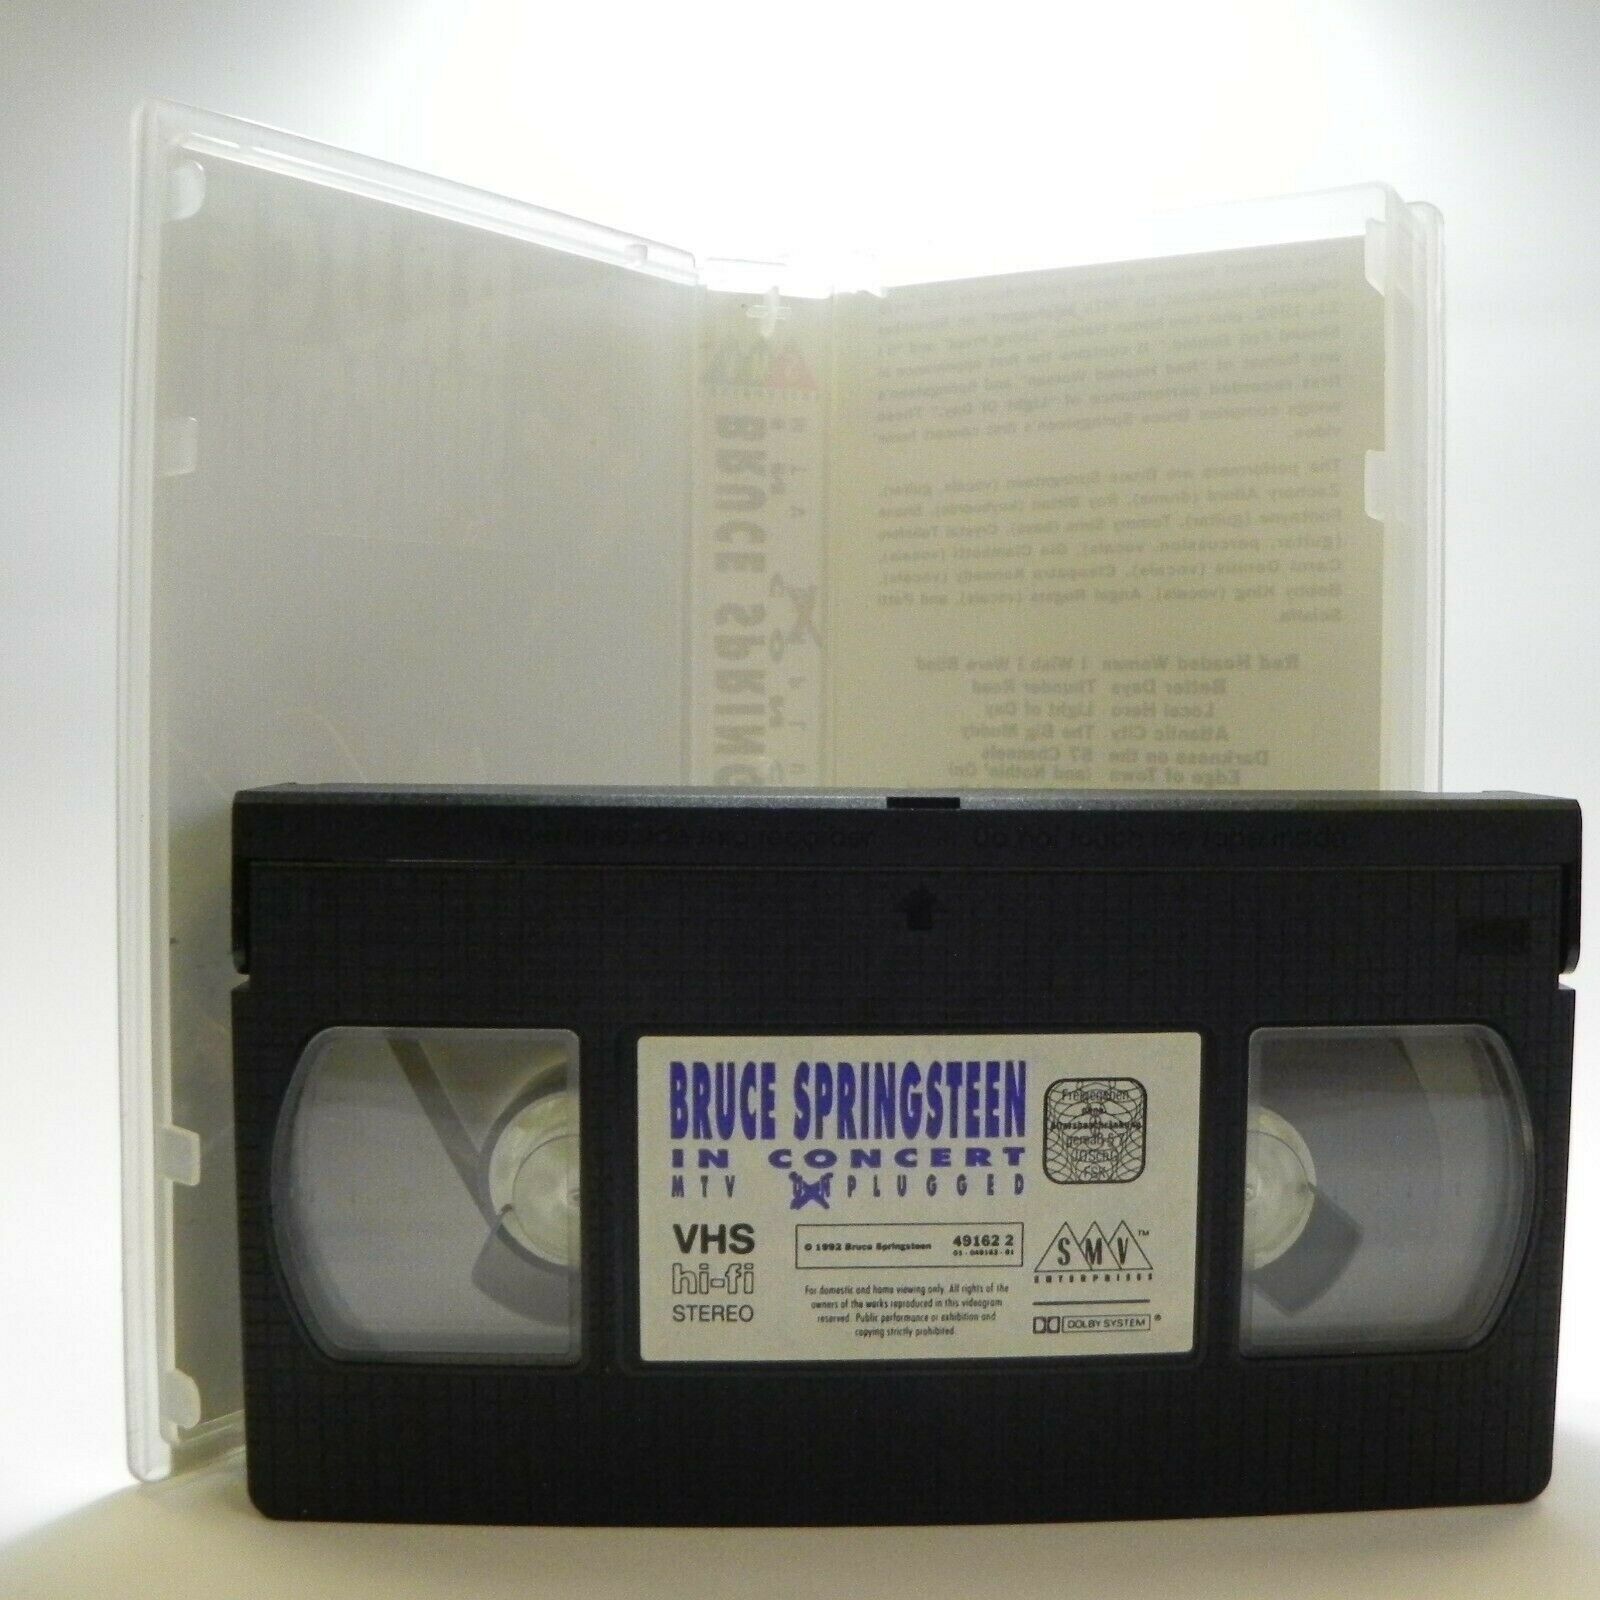 Bruce Springsteen In Concert - MTV Unplugged - Live Performance - Music - VHS-